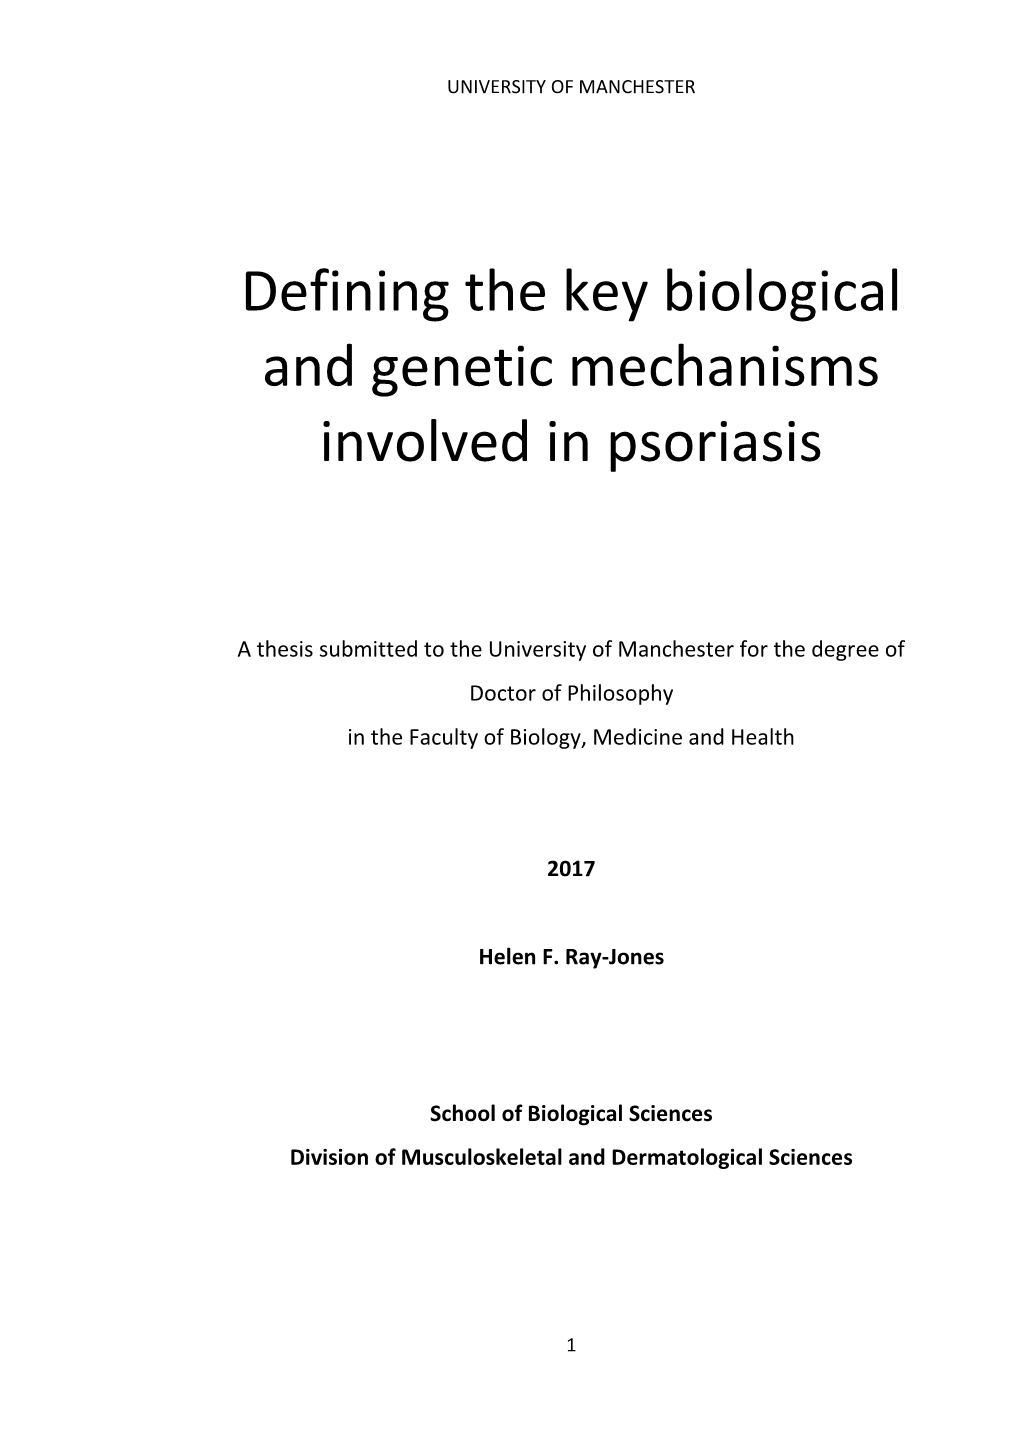 Defining the Key Biological and Genetic Mechanisms Involved in Psoriasis